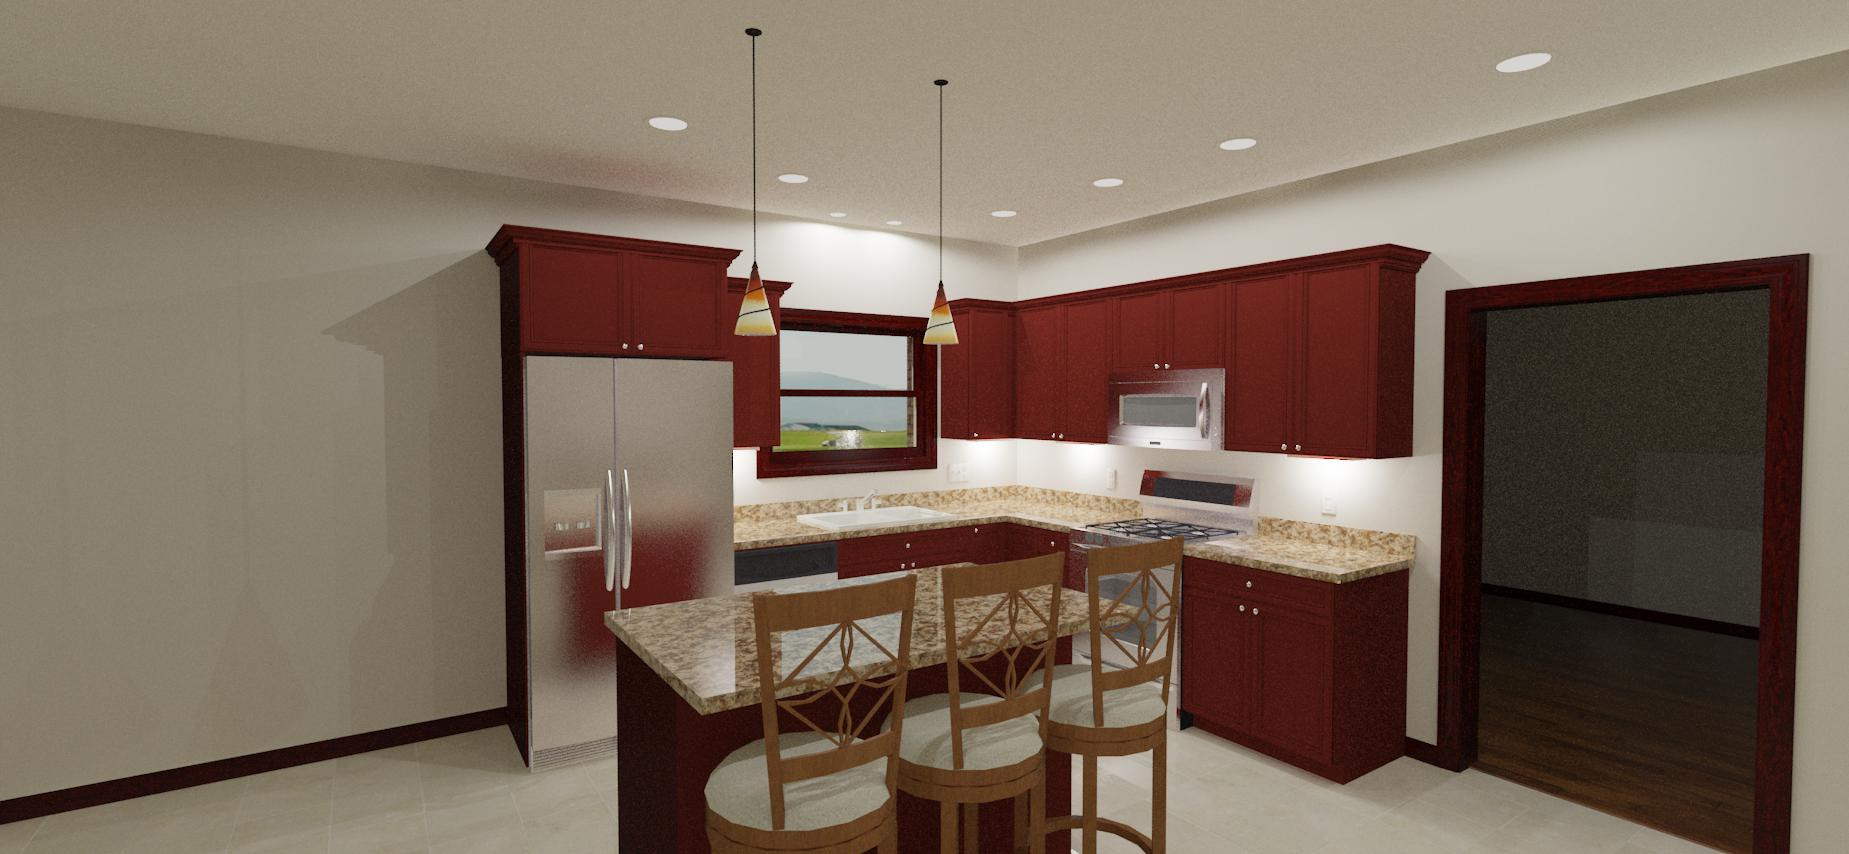 Recessed Lighting Placement Kitchen
 New Kitchen Recessed Lighting Layout Electrician Talk